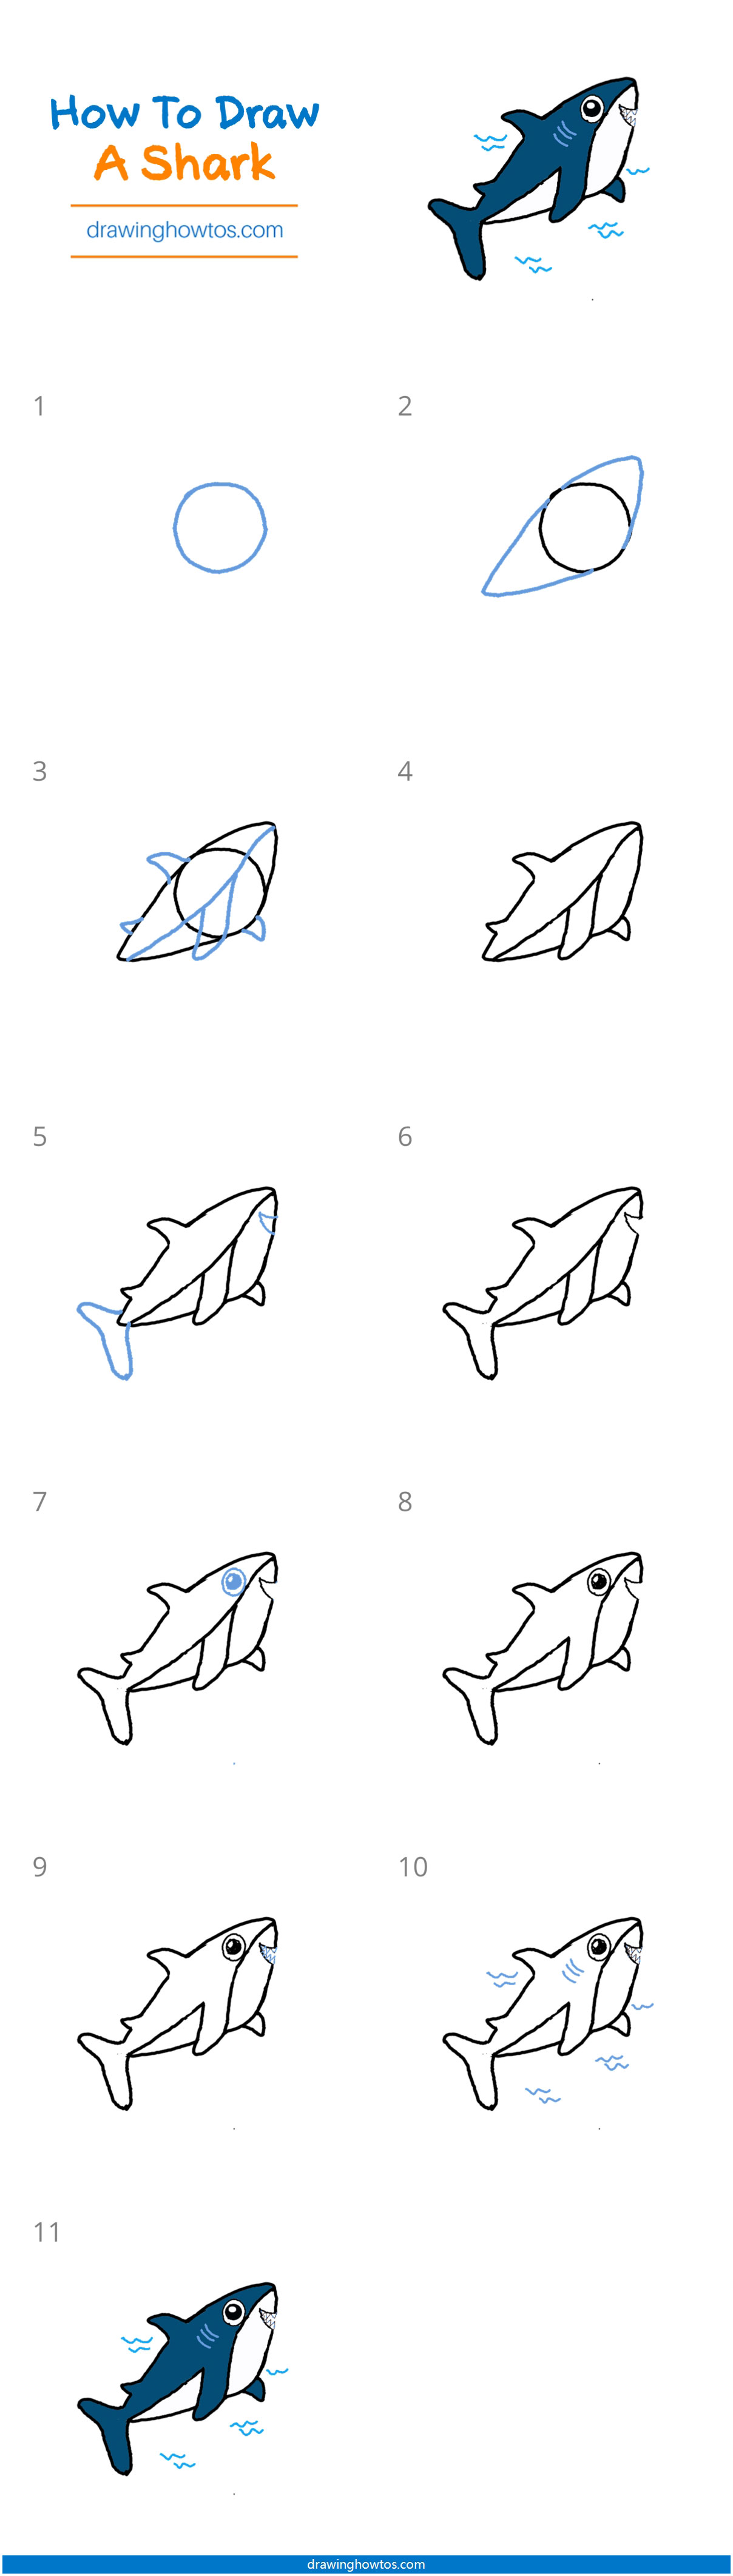 How to Draw a Shark Step by Step